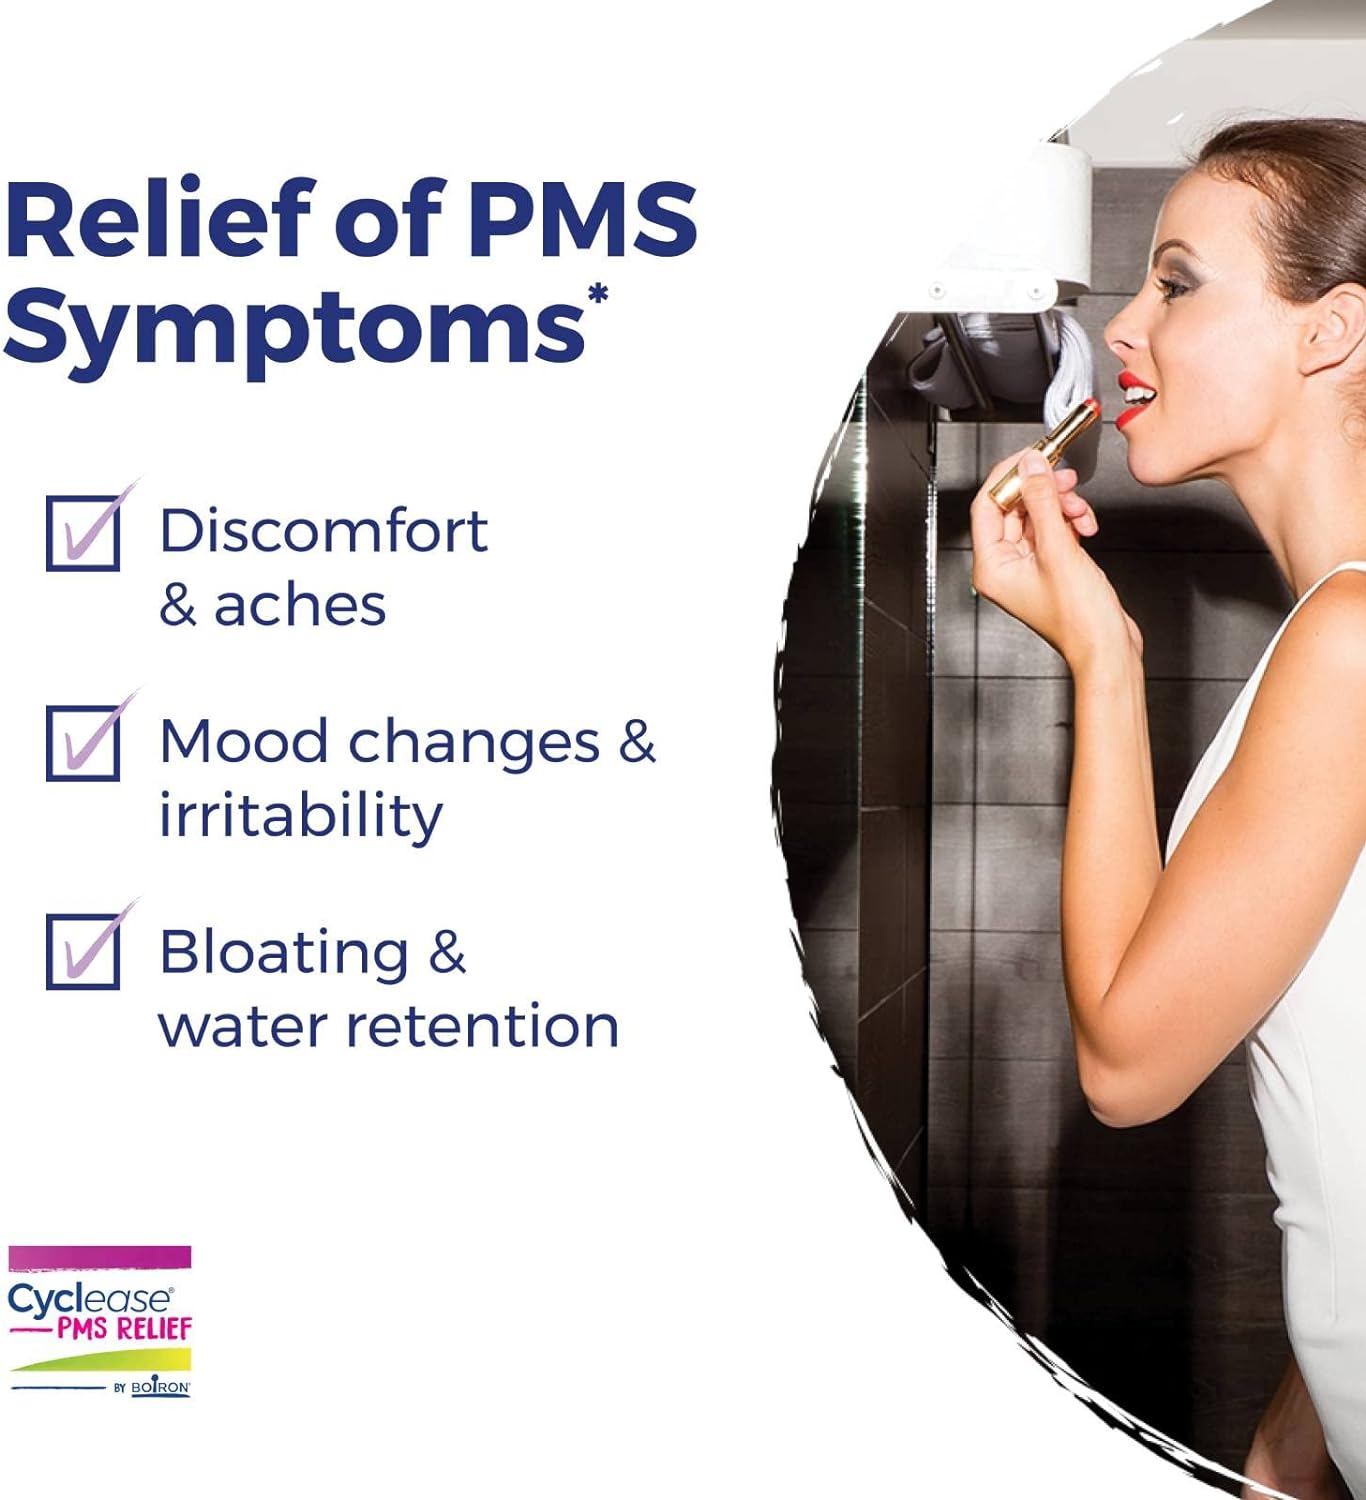 Boiron Cyclease PMS Relief Tablets for Symptoms from PMS - 60 Count